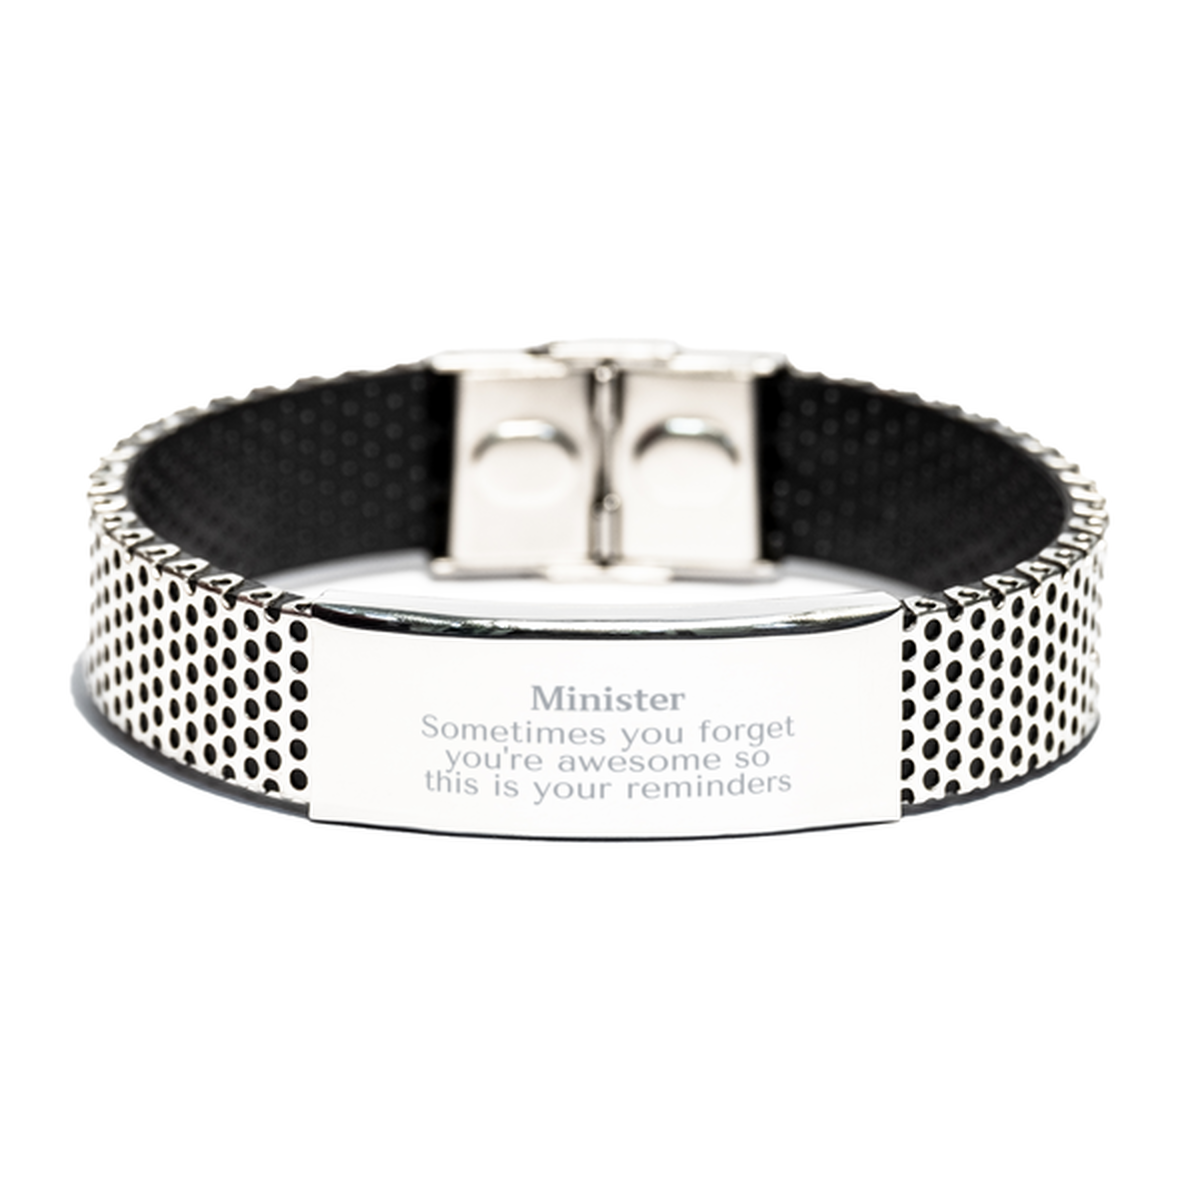 Sentimental Minister Stainless Steel Bracelet, Minister Sometimes you forget you're awesome so this is your reminders, Graduation Christmas Birthday Gifts for Minister, Men, Women, Coworkers